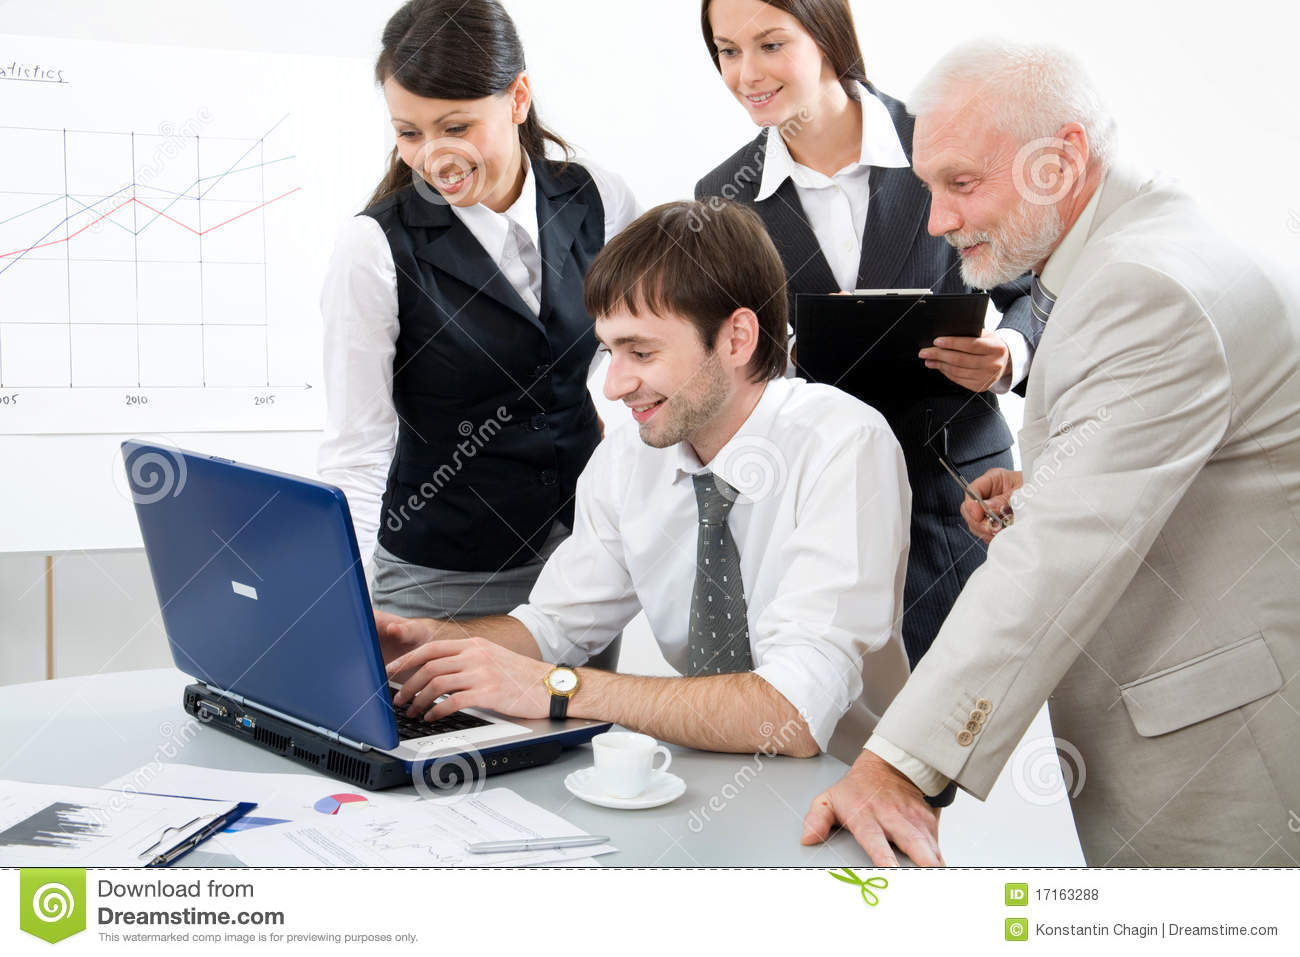 Free Stock Photos Business People